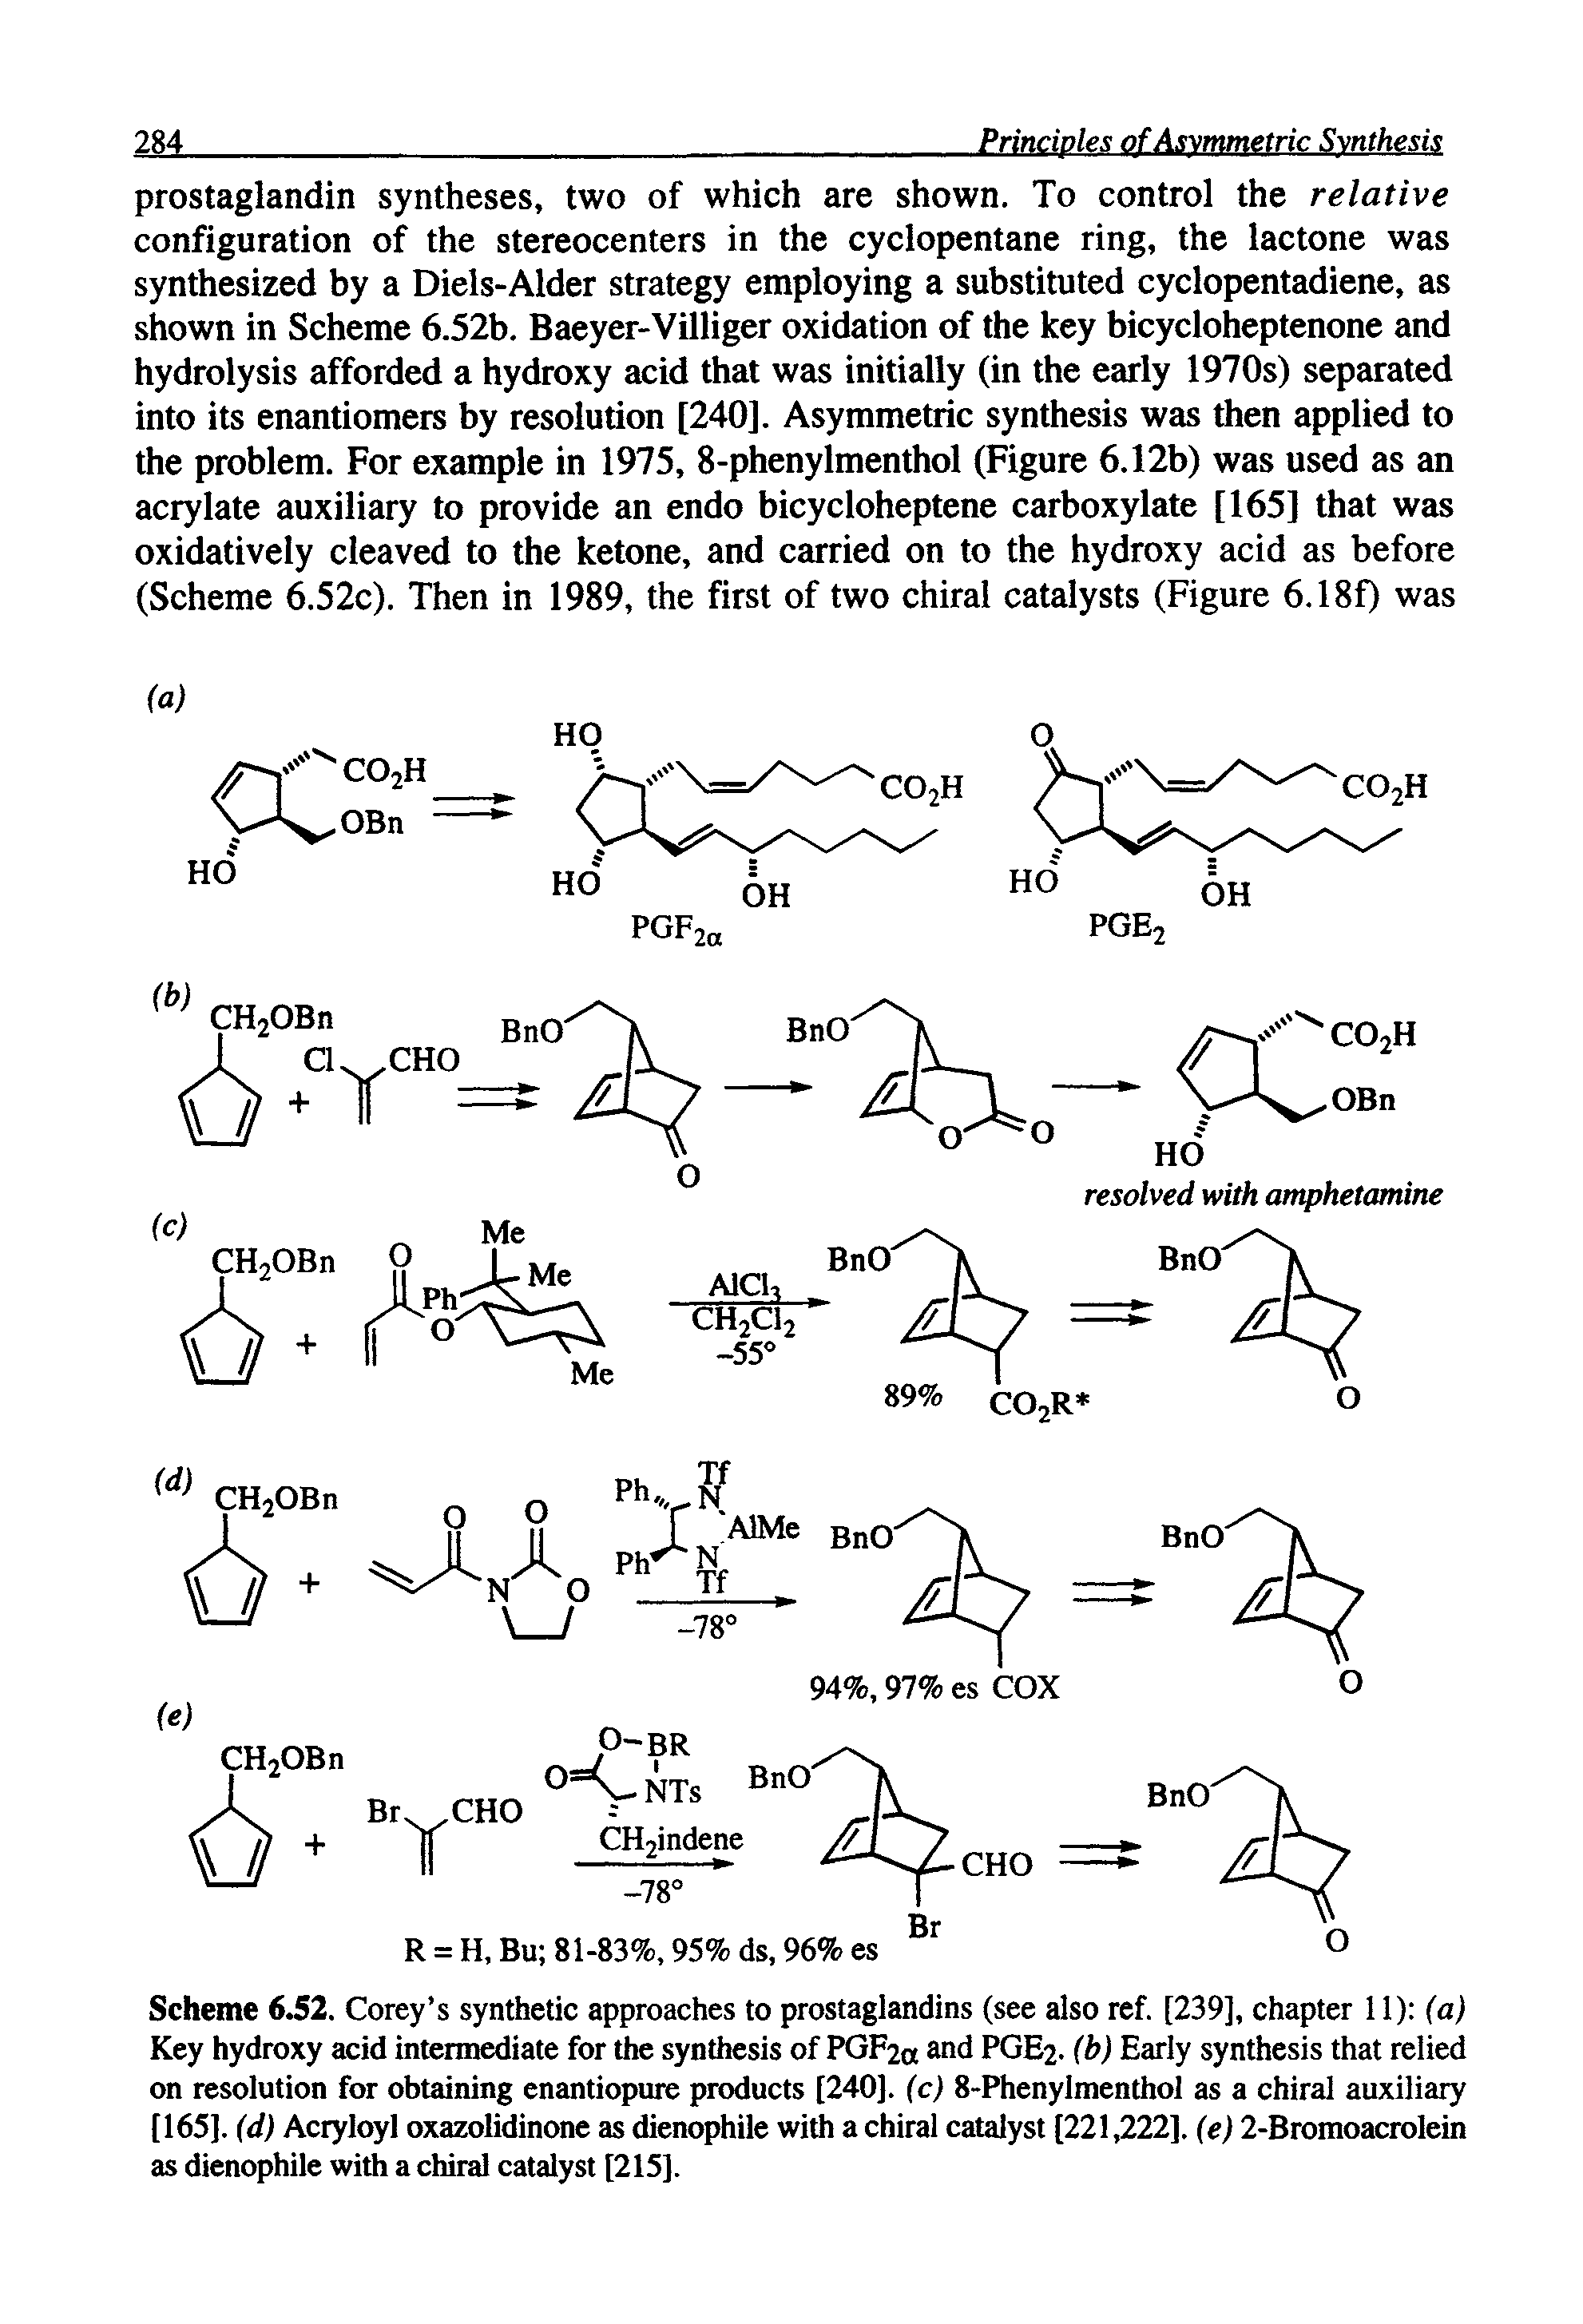 Scheme 6.52. Corey s synthetic approaches to prostaglandins (see also ref. [239], chapter 11) (a) Key hydroxy acid intermediate for the synthesis of PGF2 and PGE2. (b) Early synthesis that relied on resolution for obtaining enantiopure products [240]. (c) 8-Phenylmenthol as a chiral auxiliary [165]. (d) Acryloyl oxazolidinone as dienophile with a chiral catalyst [221,222]. (e) 2-Bromoacrolein as dienophile with a chiral catalyst [215],...